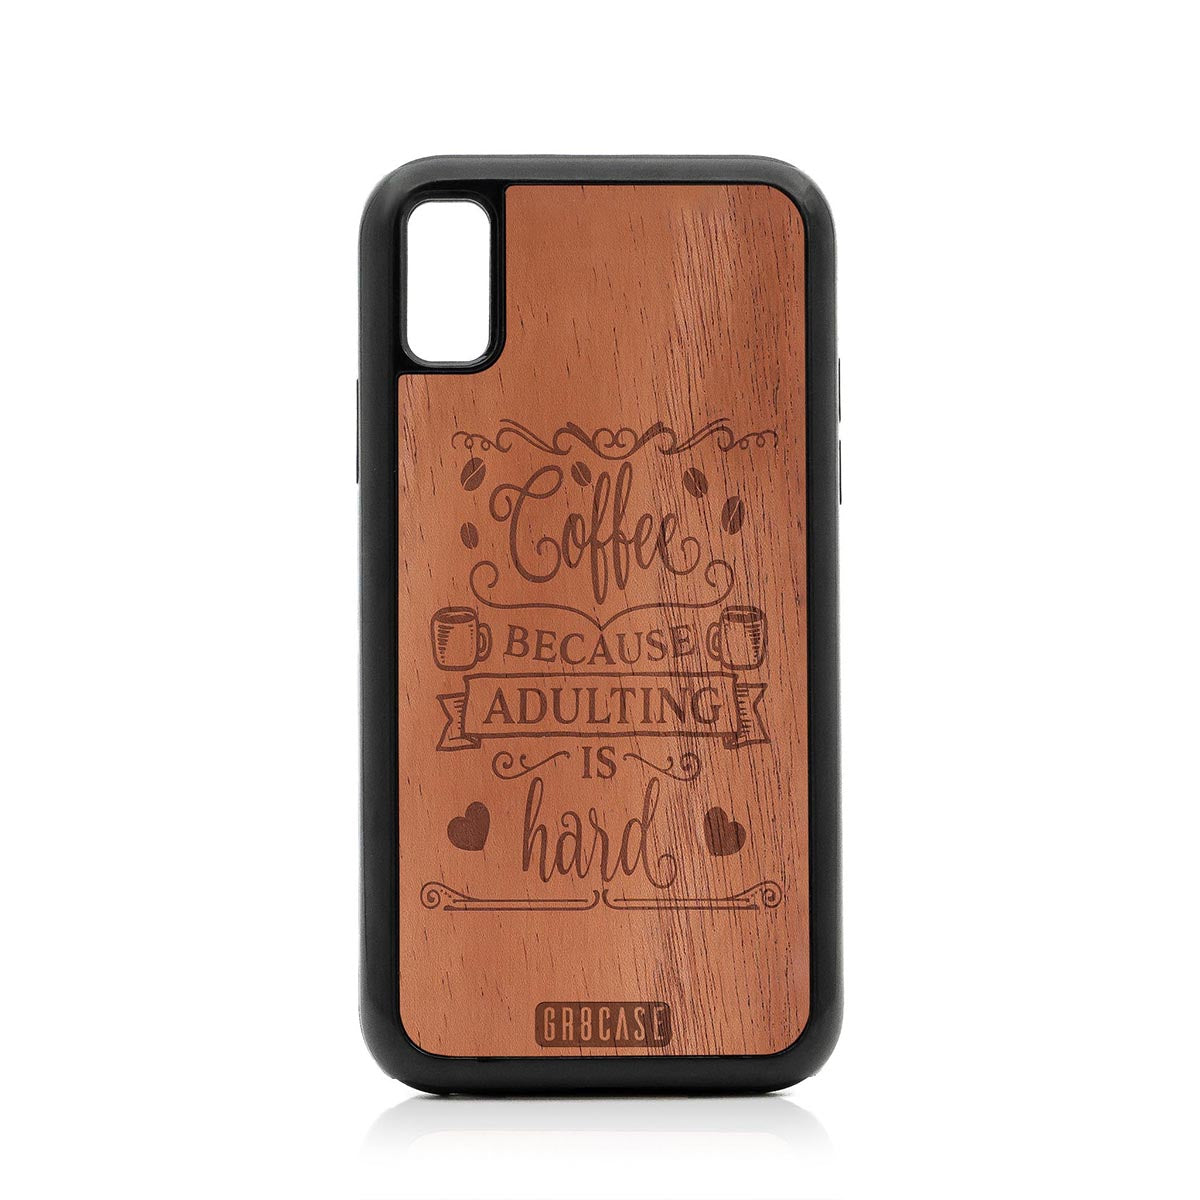 Coffee Because Adulting Is Hard Design Wood Case For iPhone X/XS by GR8CASE